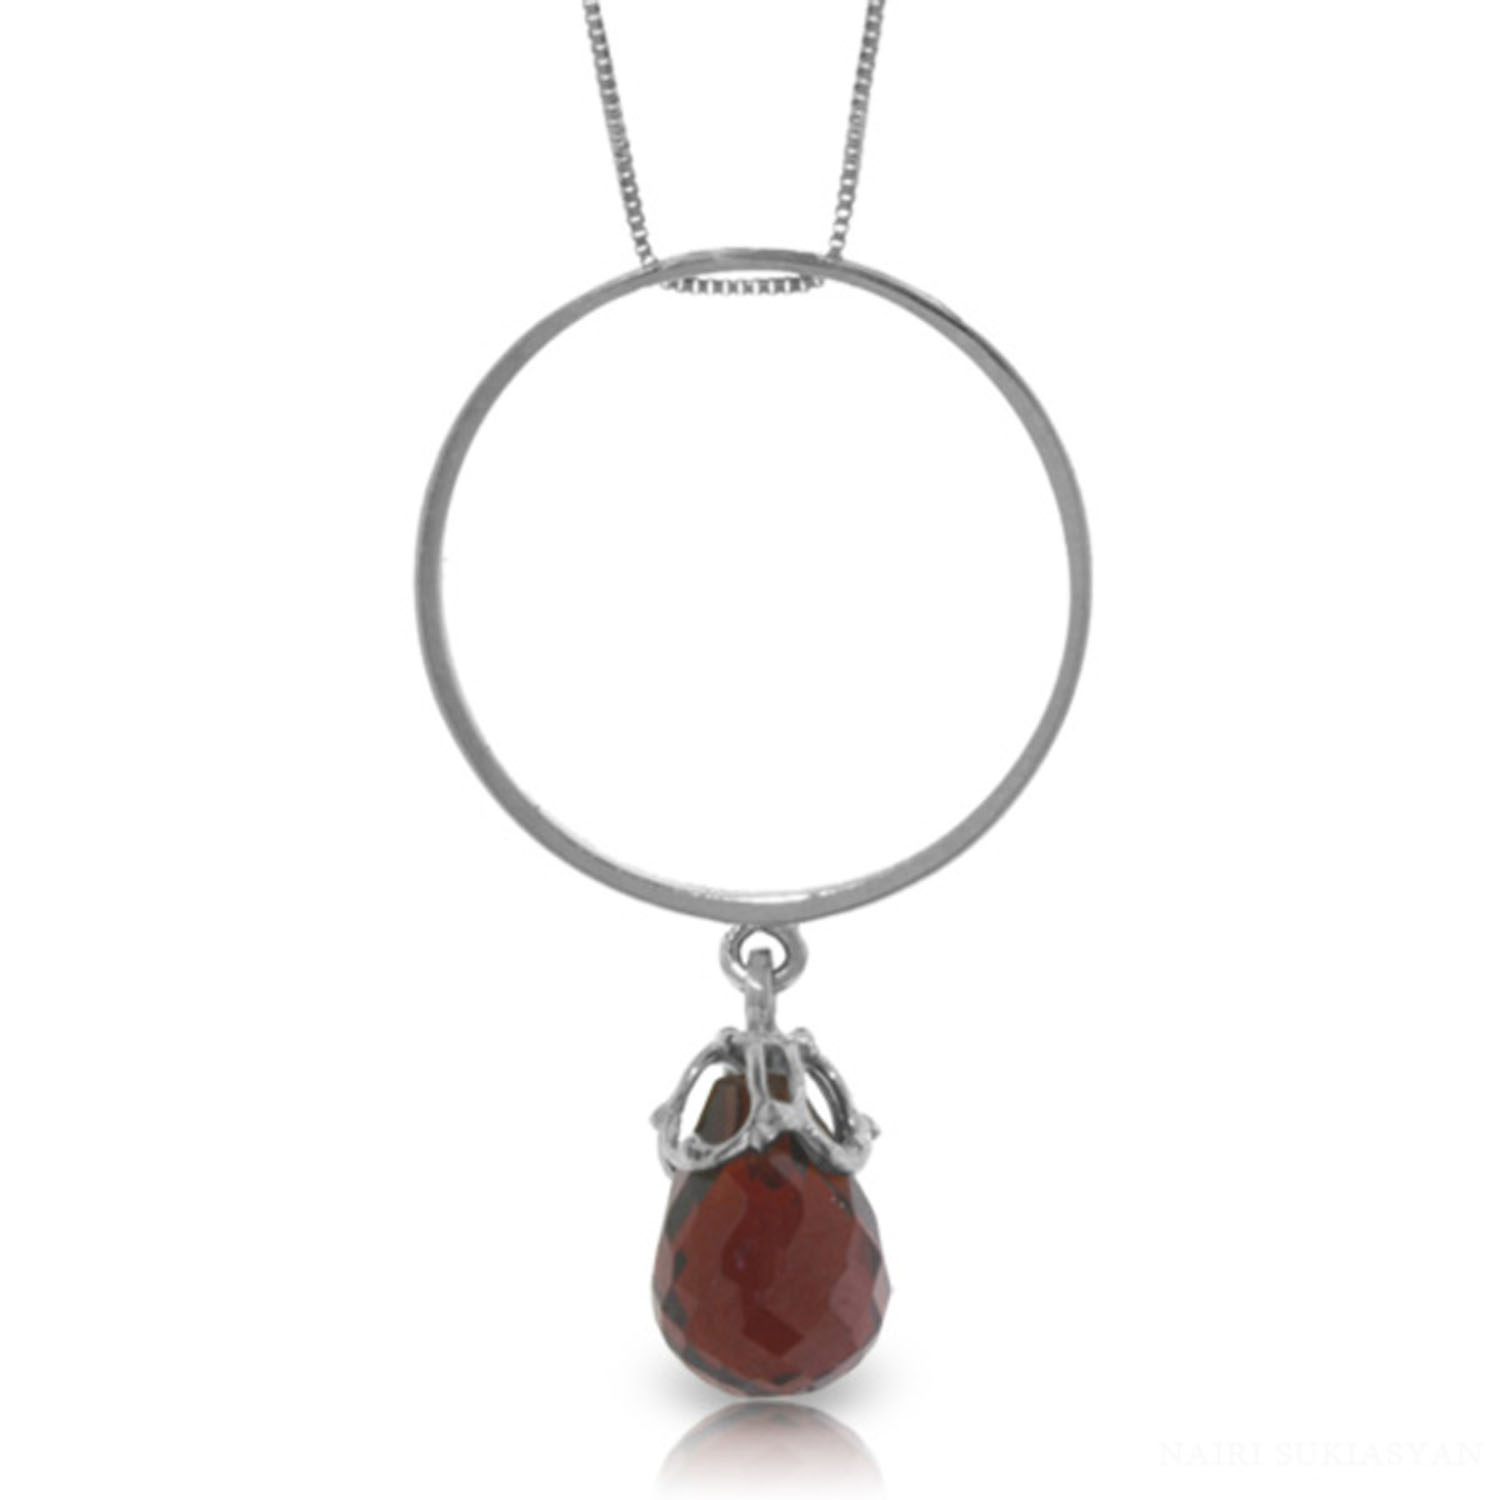 Galaxy Gold 3 Carat 14k 20" Solid White Gold Necklace with Natural Garnet Charm Circle Pendant - image 1 of 2